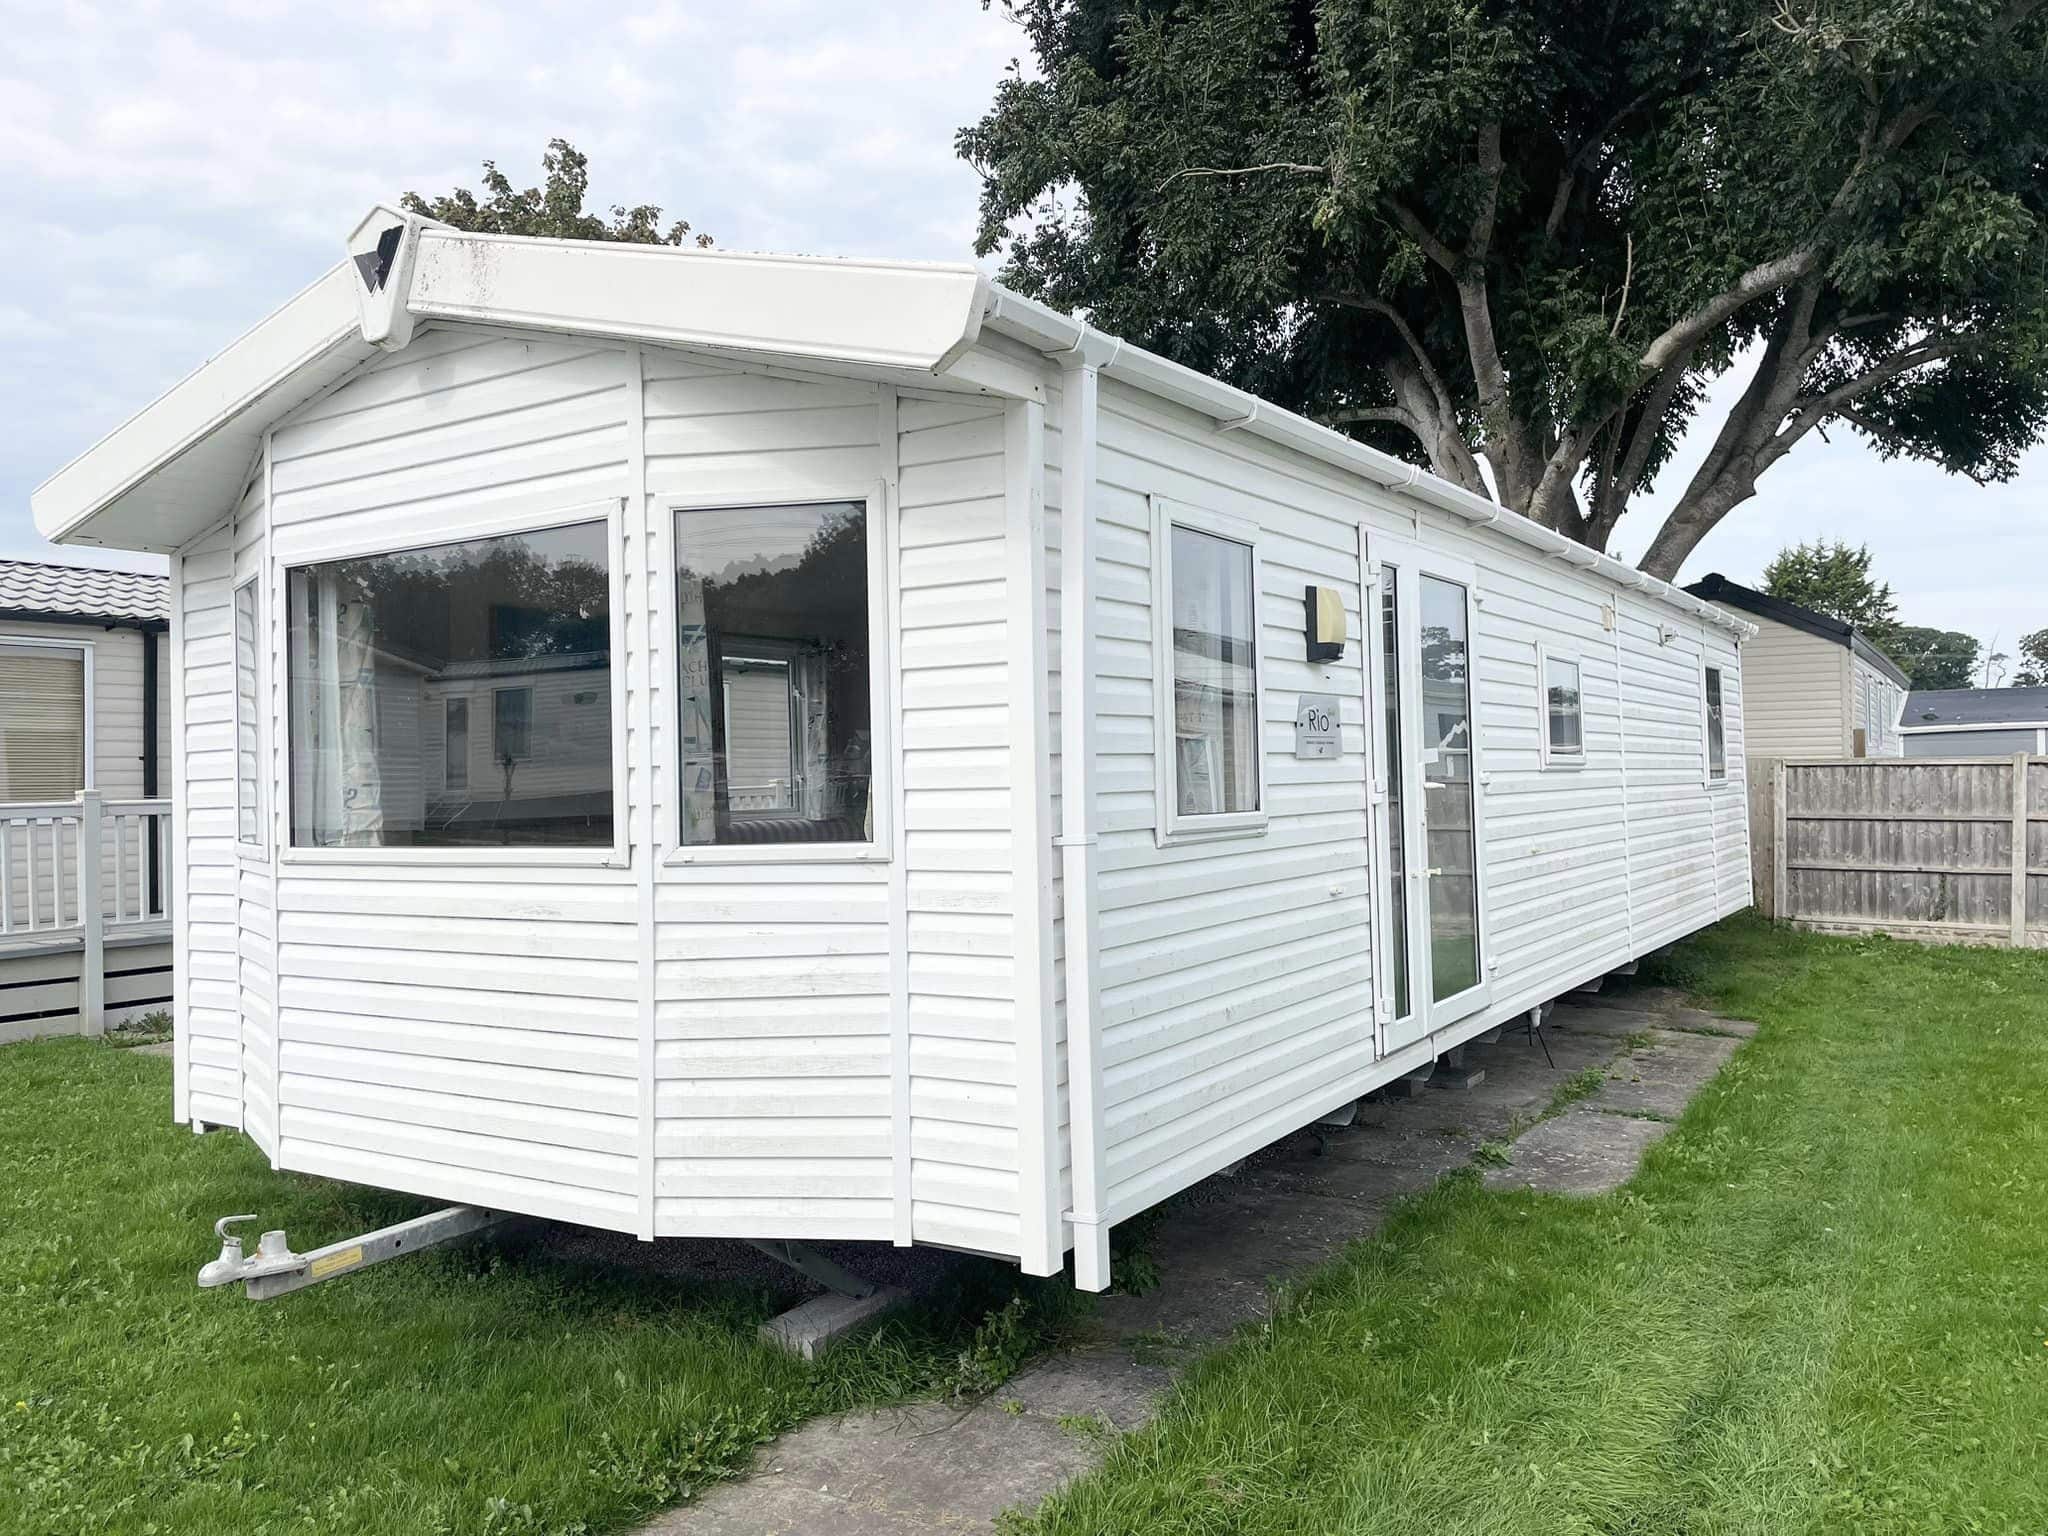 Willerby Rio Gold - Adapted Holiday Home